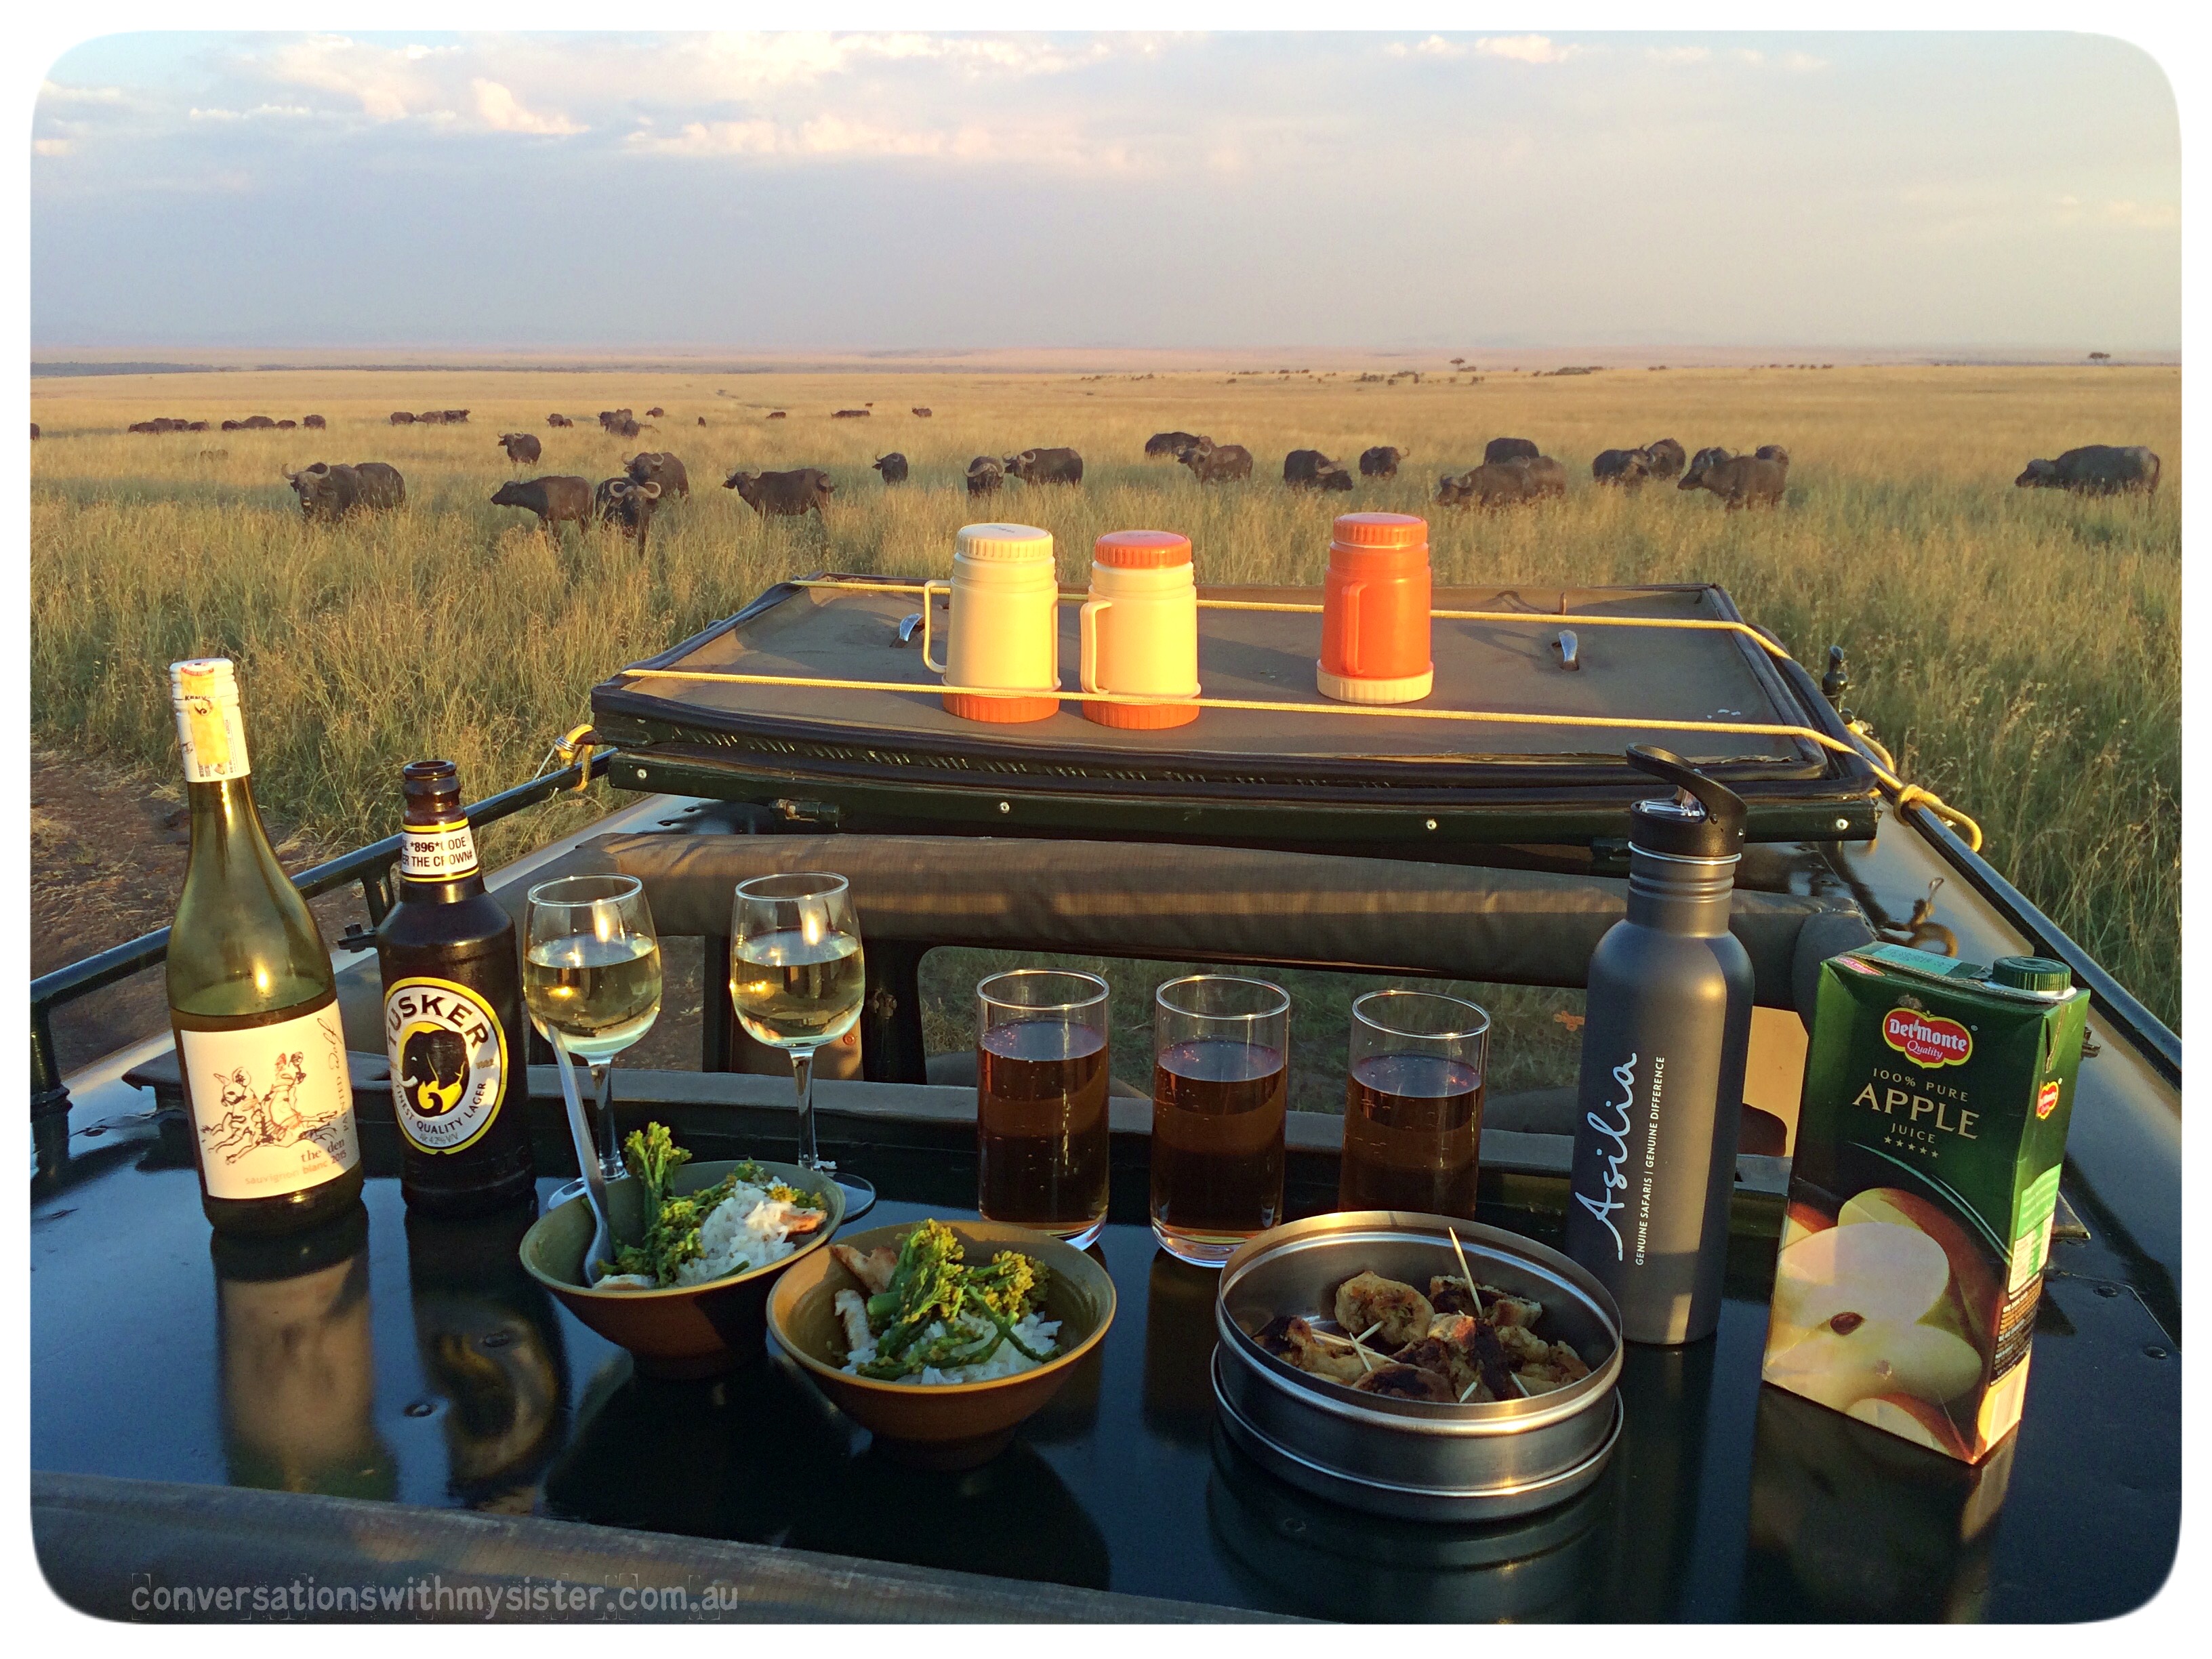 The Masai Mara holds unmistakable magic. Glamping out on the plains, being surrounded by African wildlife, being educated by a Masai Warrior and enjoying sundowners on the roof of the safari jeep is an experience which stays with you for a lifetime. Read on for all the reasons why an adventure to Kenya should be on everyone's bucket list.